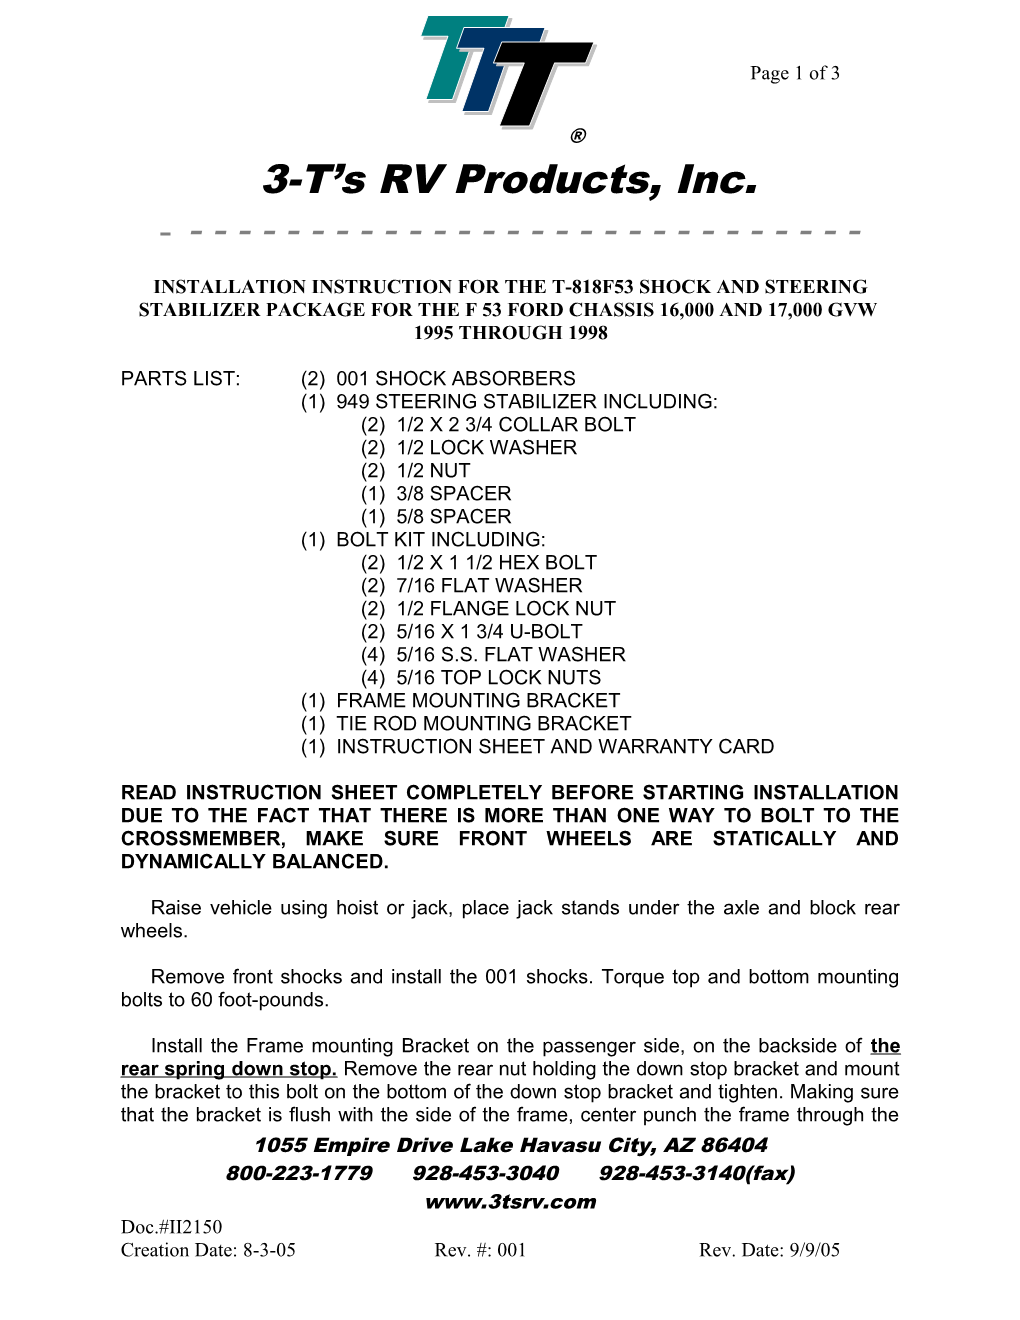 3-T S RV Products, Inc